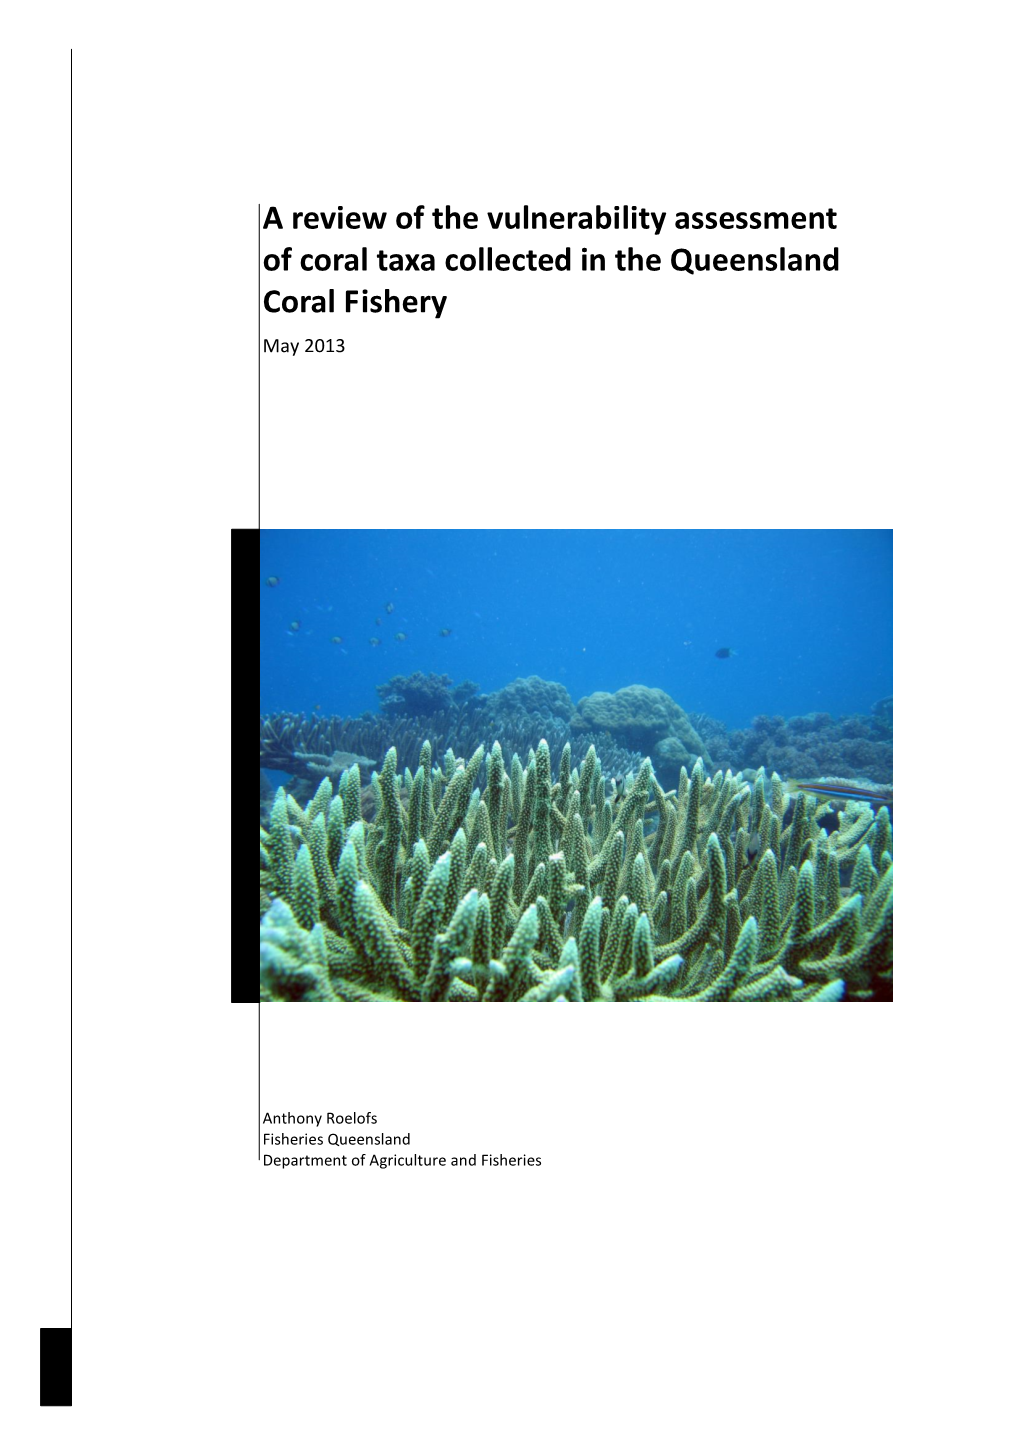 Qld Coral Fishery Vulnerability Assessment 2013